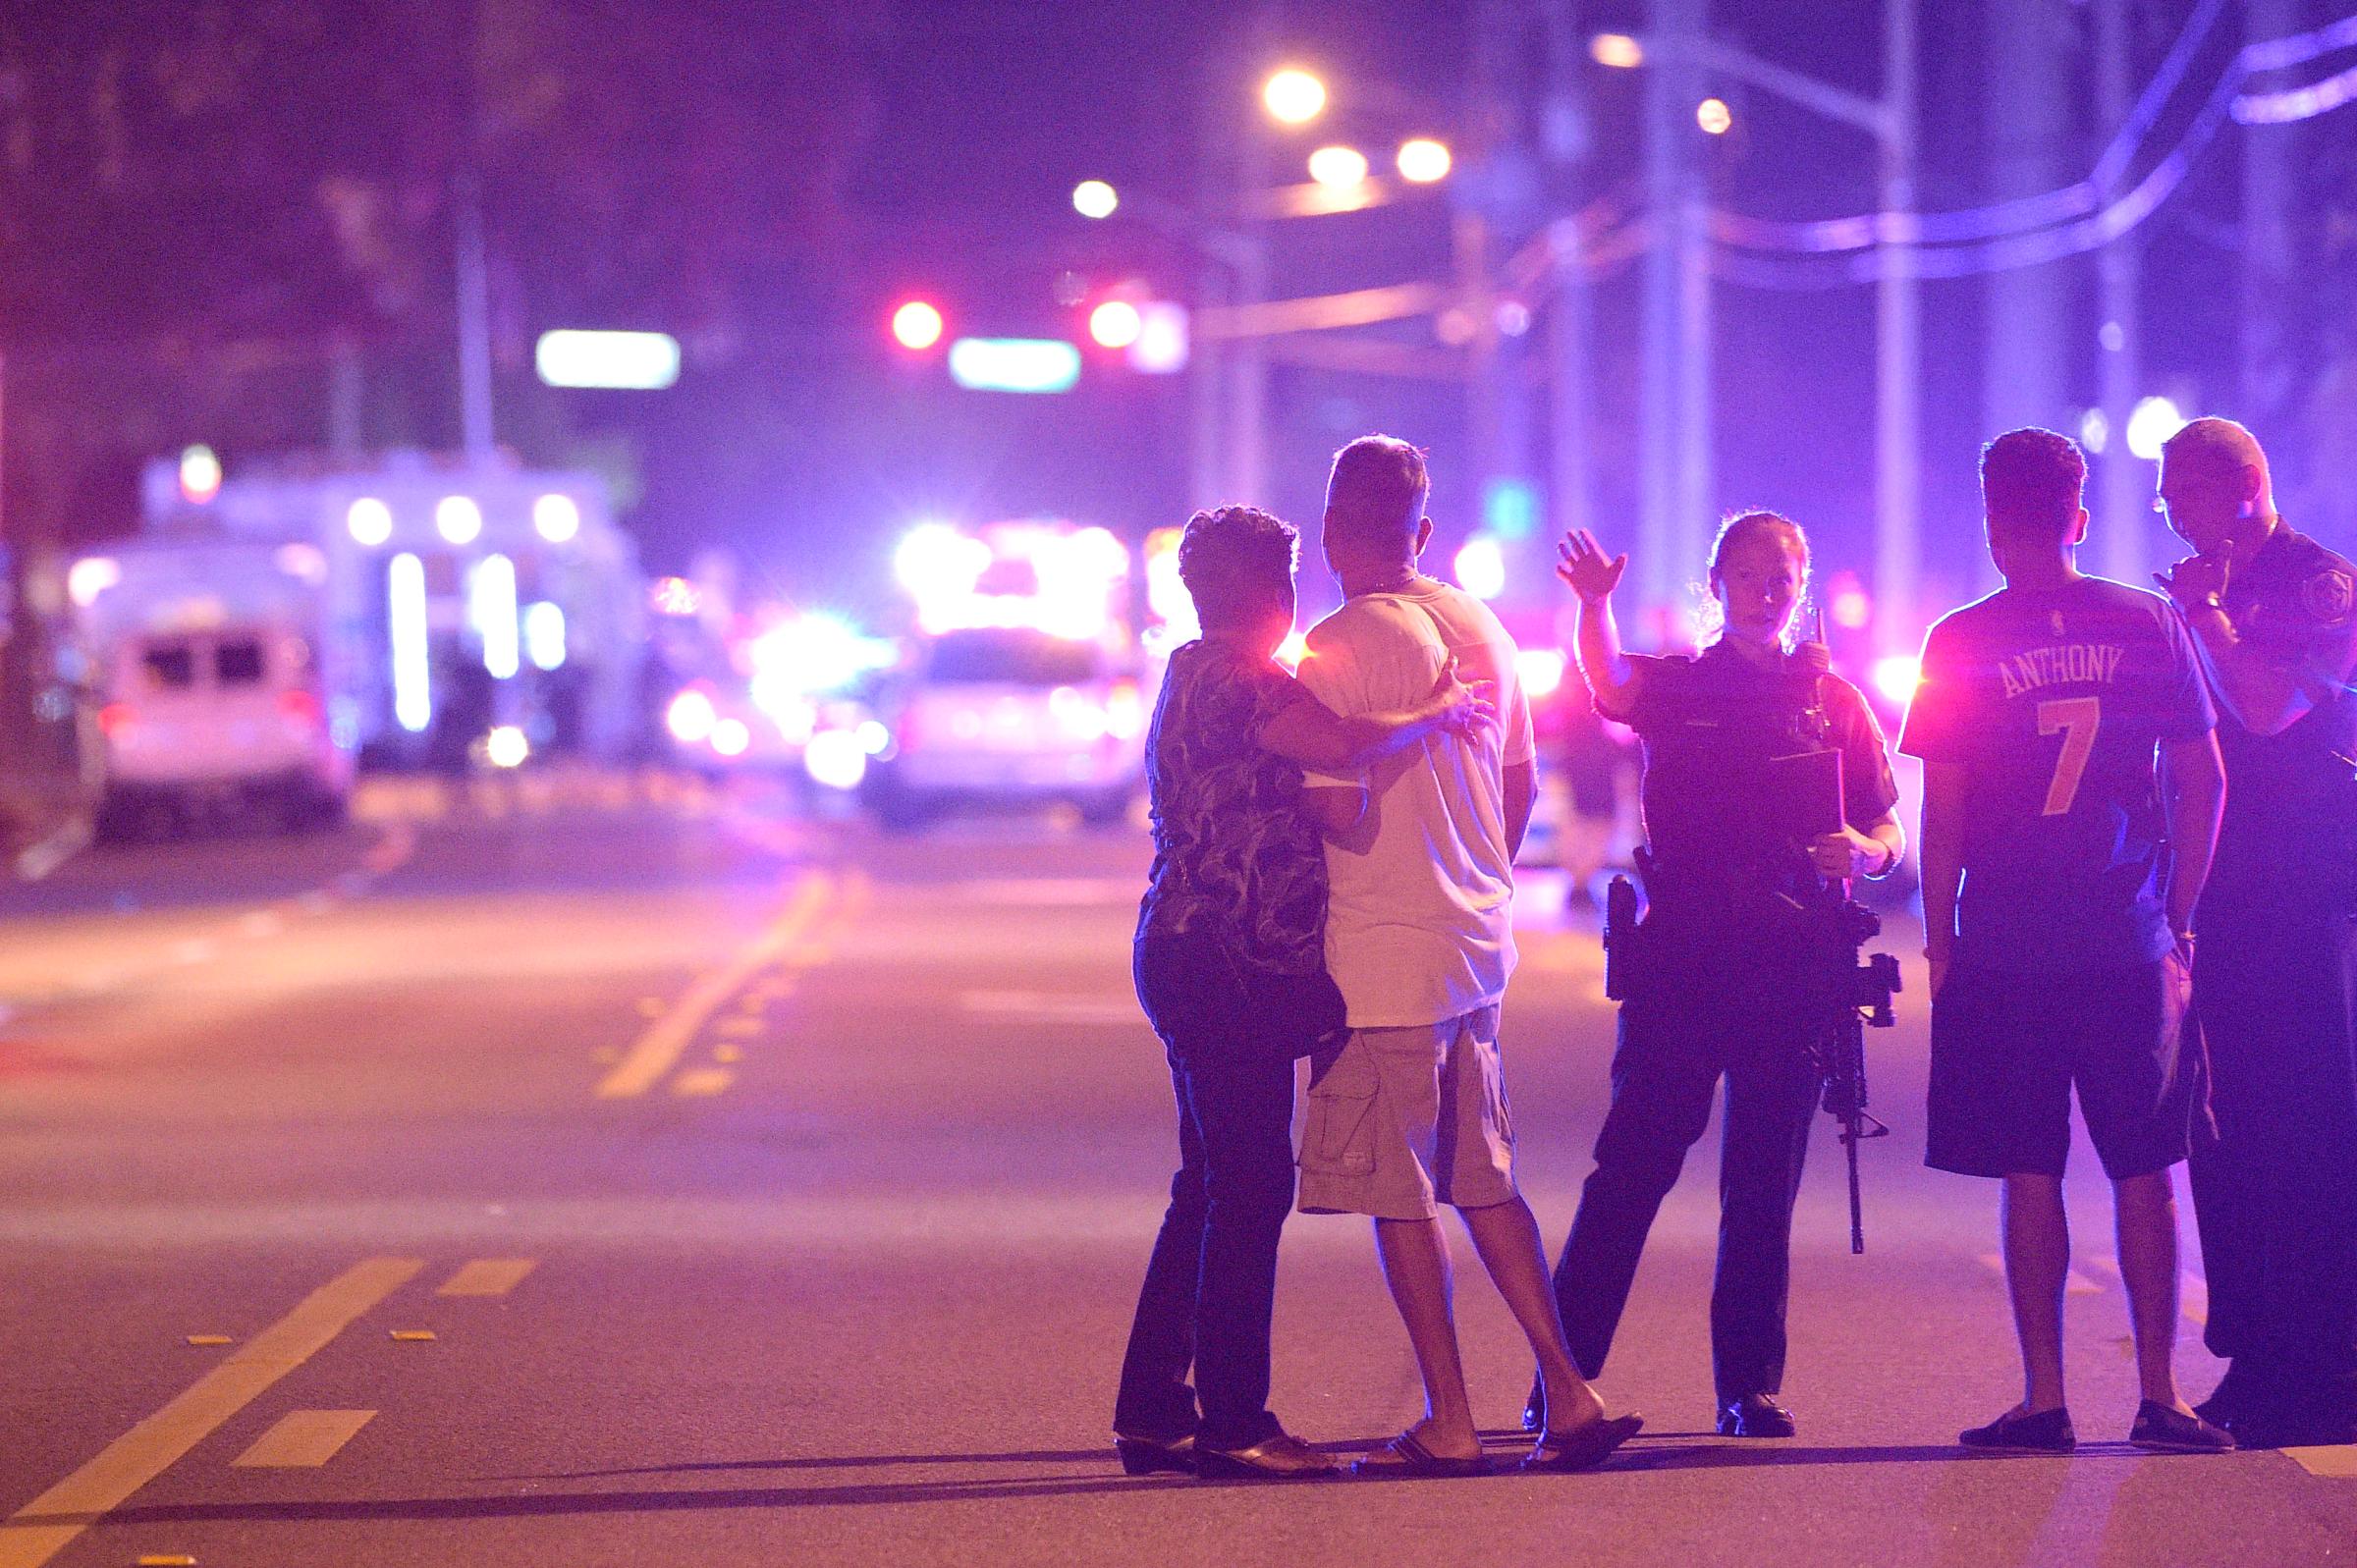 Police officers direct family members away from a shooting at Pulse nightclub in Orlando, Fla., on June 12, 2016.